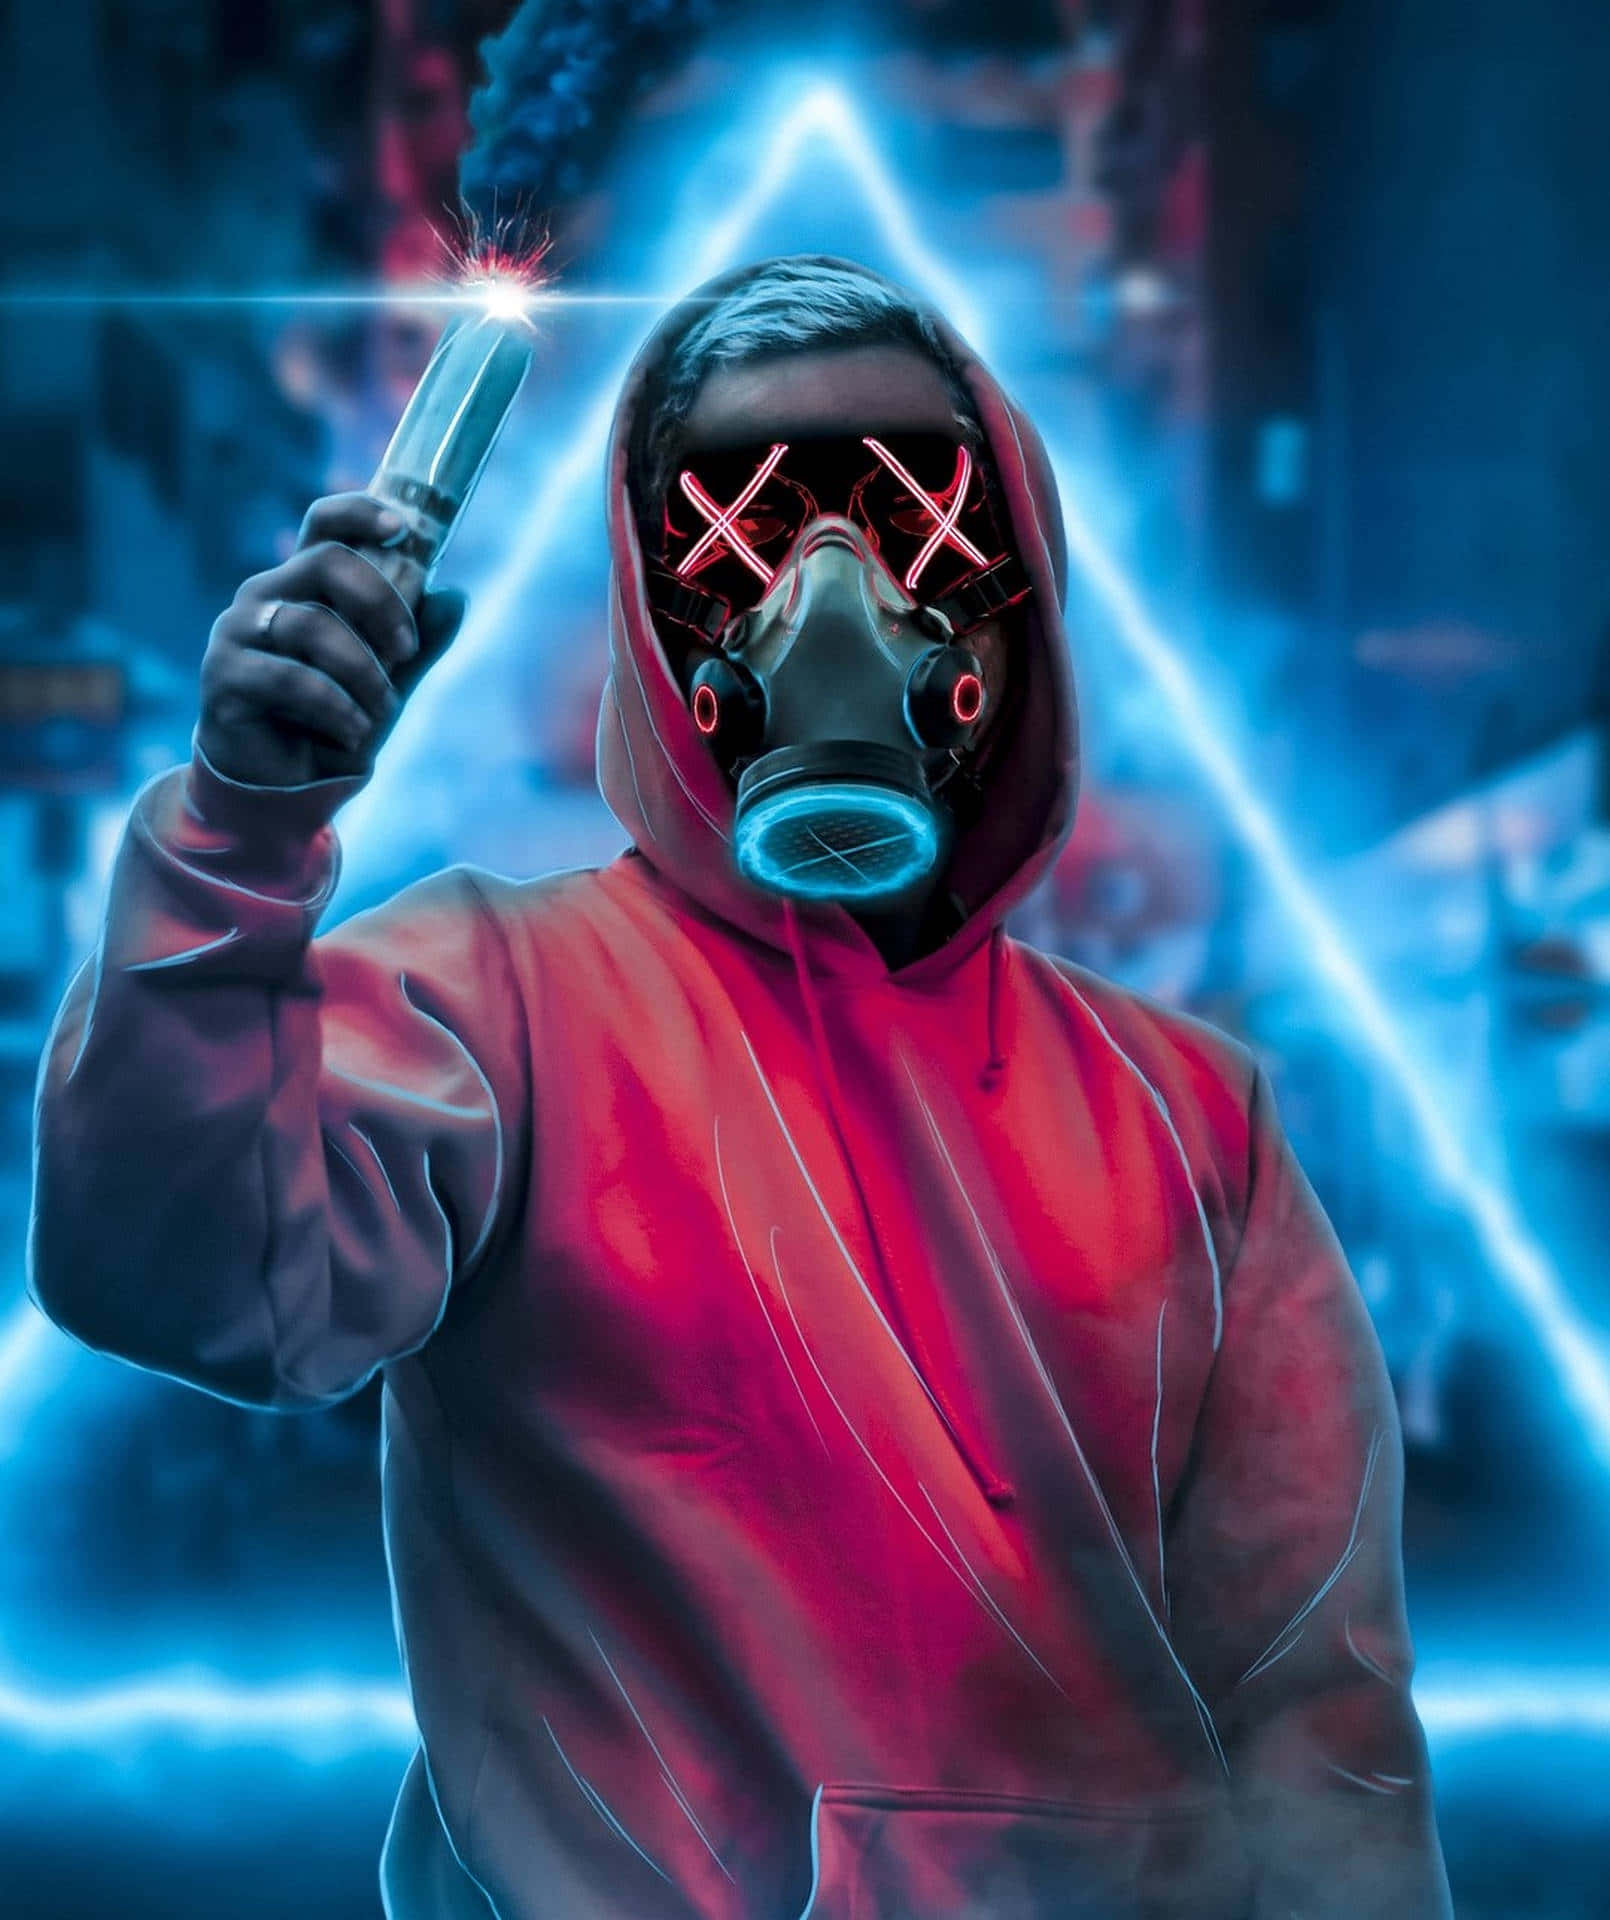 Cool Masked Guy With Smoke Stick Profile Picture